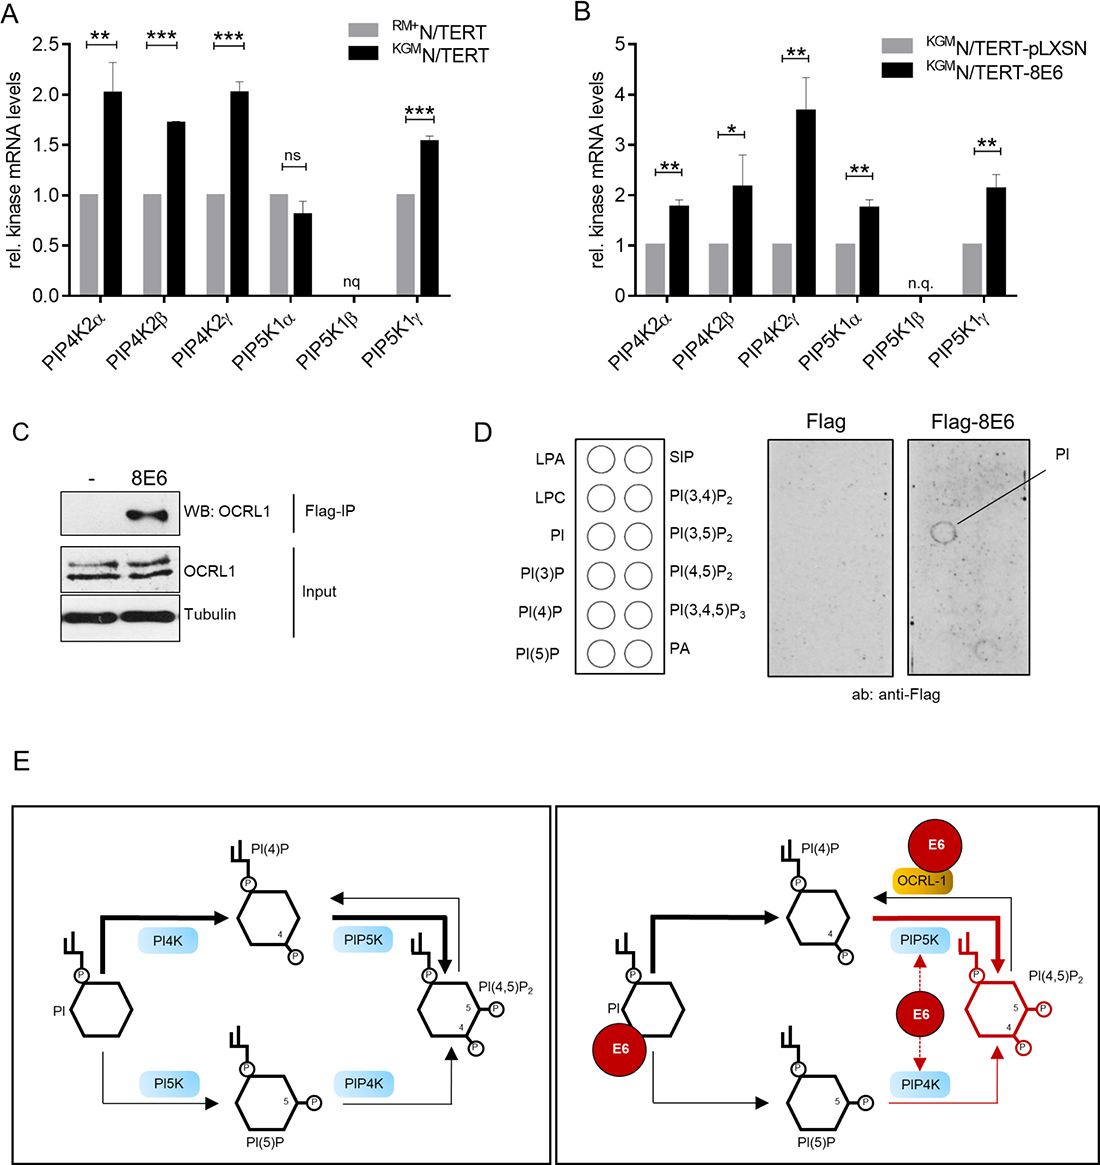 HPV8-E6 interferes with kinases and the phosphatase regulating PI(4,5)P2 levels.